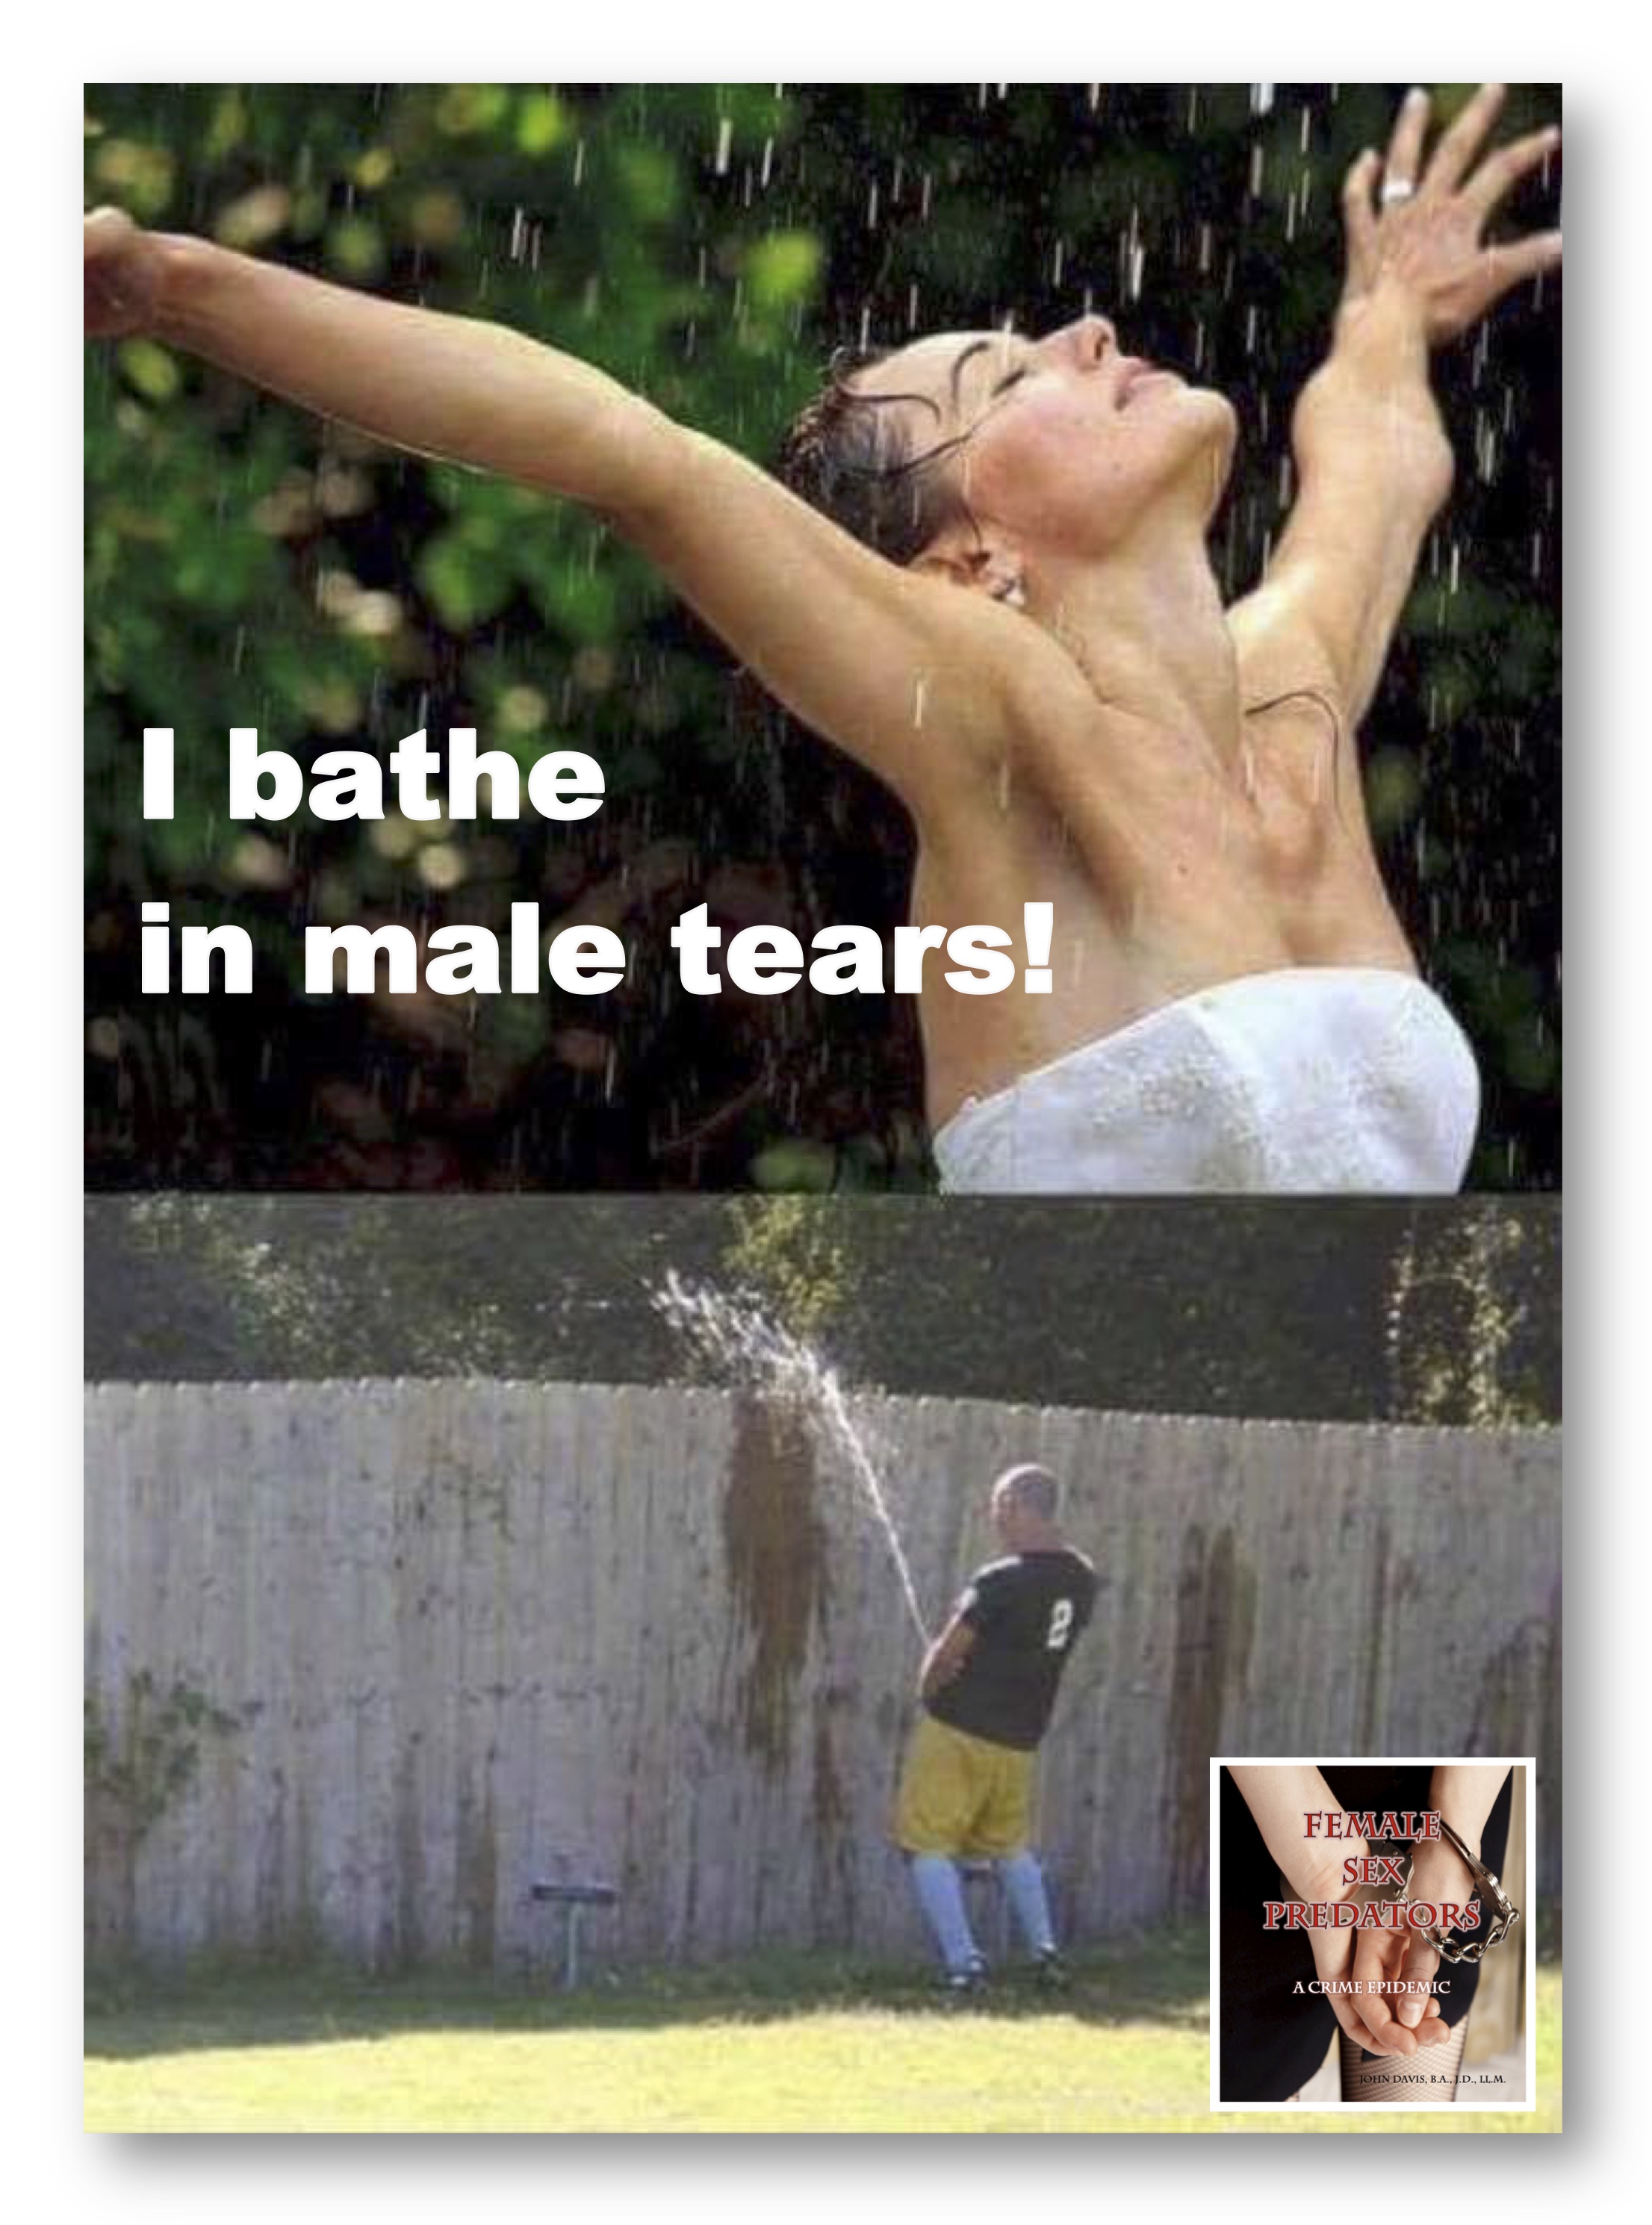 Meme addressing male tears in a humorous manner.